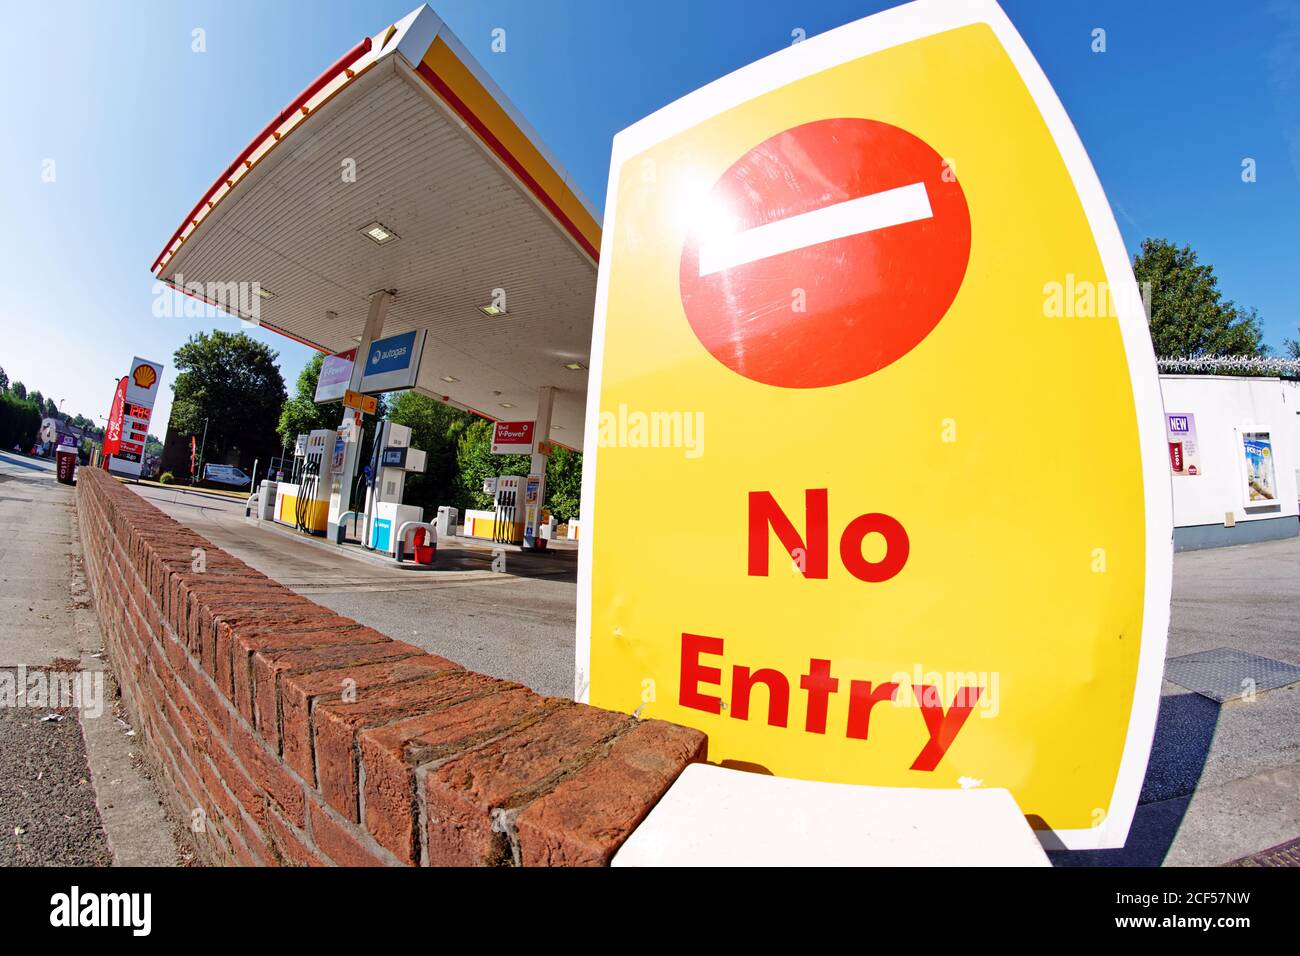 Shell service station petrol garage forecourt with No Entry sign Stock Photo